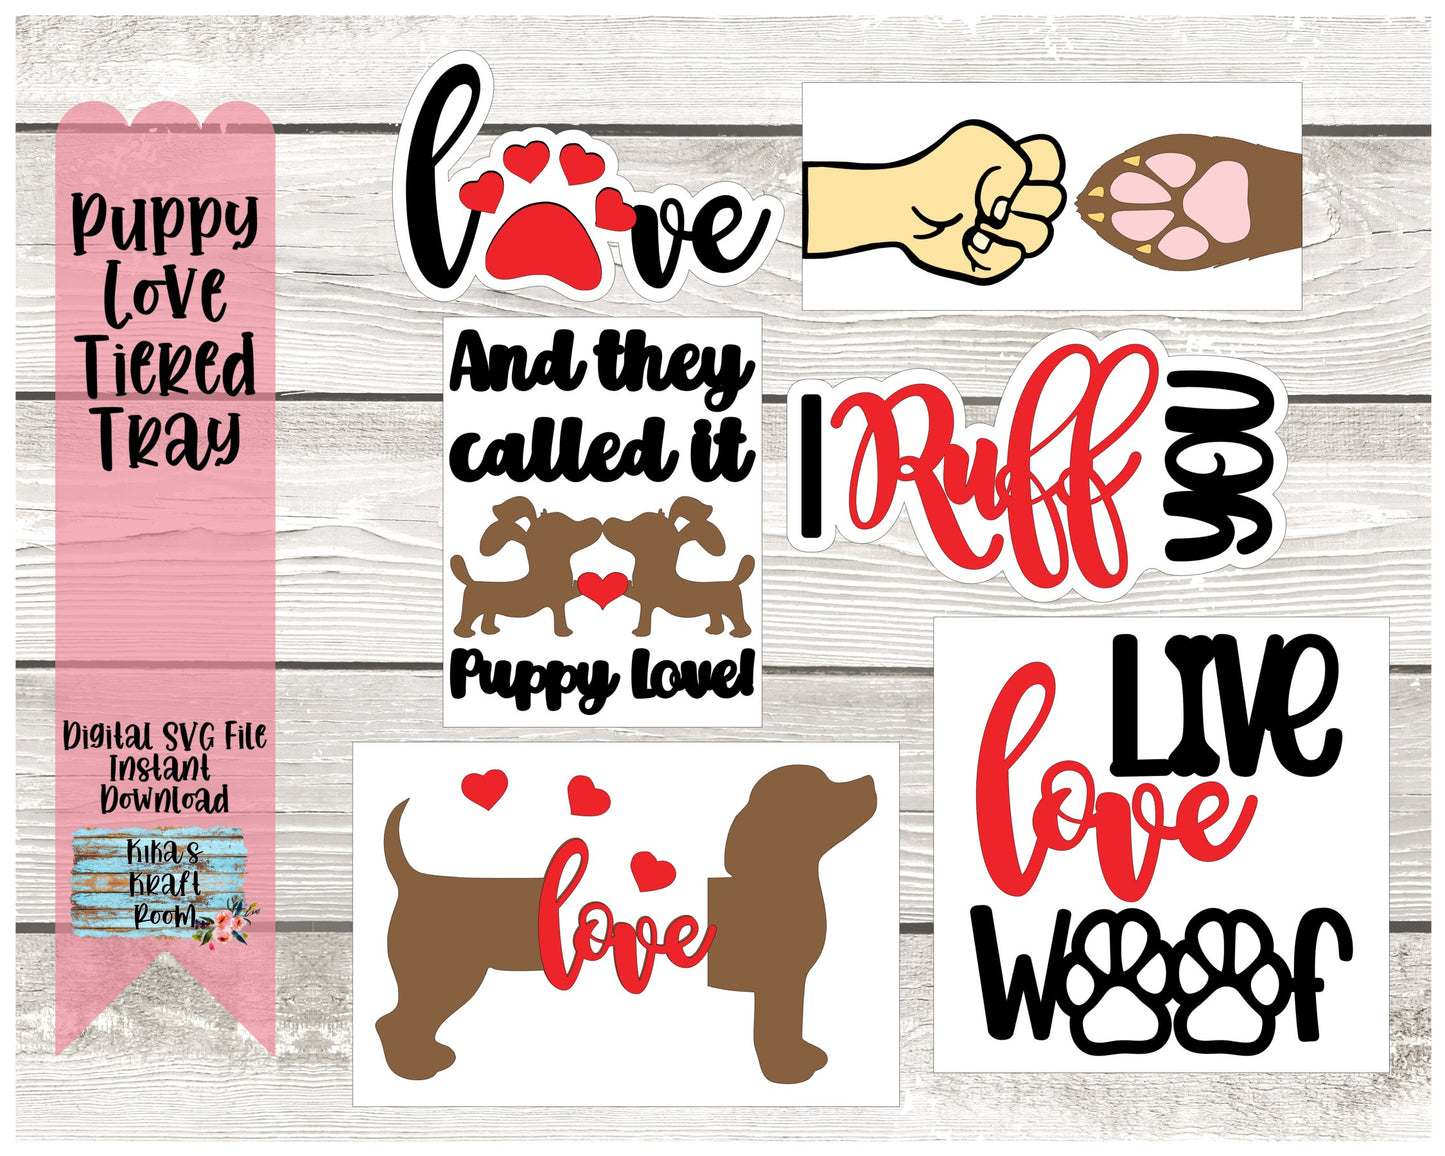 Puppy Love Tiered Tray DIGITAL SVG File